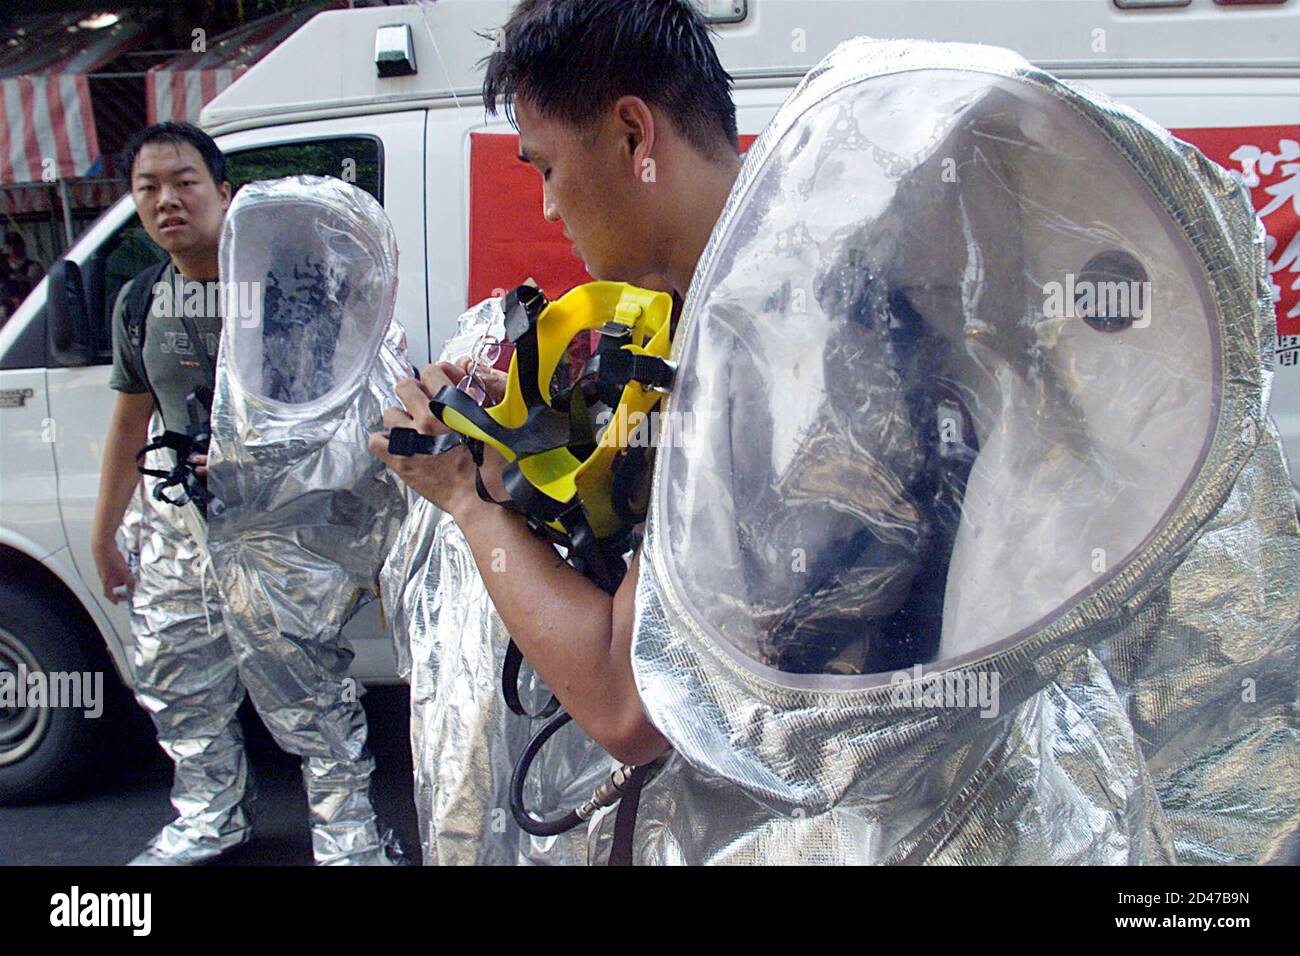 Taiwan emergency rescue members take off their chemical protection suits after a mock poison gas attack at an underground station in Taipei on October 27,2001. Taiwan, which supports the U.S.-led strikes against Afghanistan, continues to conduct security exercises. REUTERS/Simon Kwong  SK/JIR Stock Photo